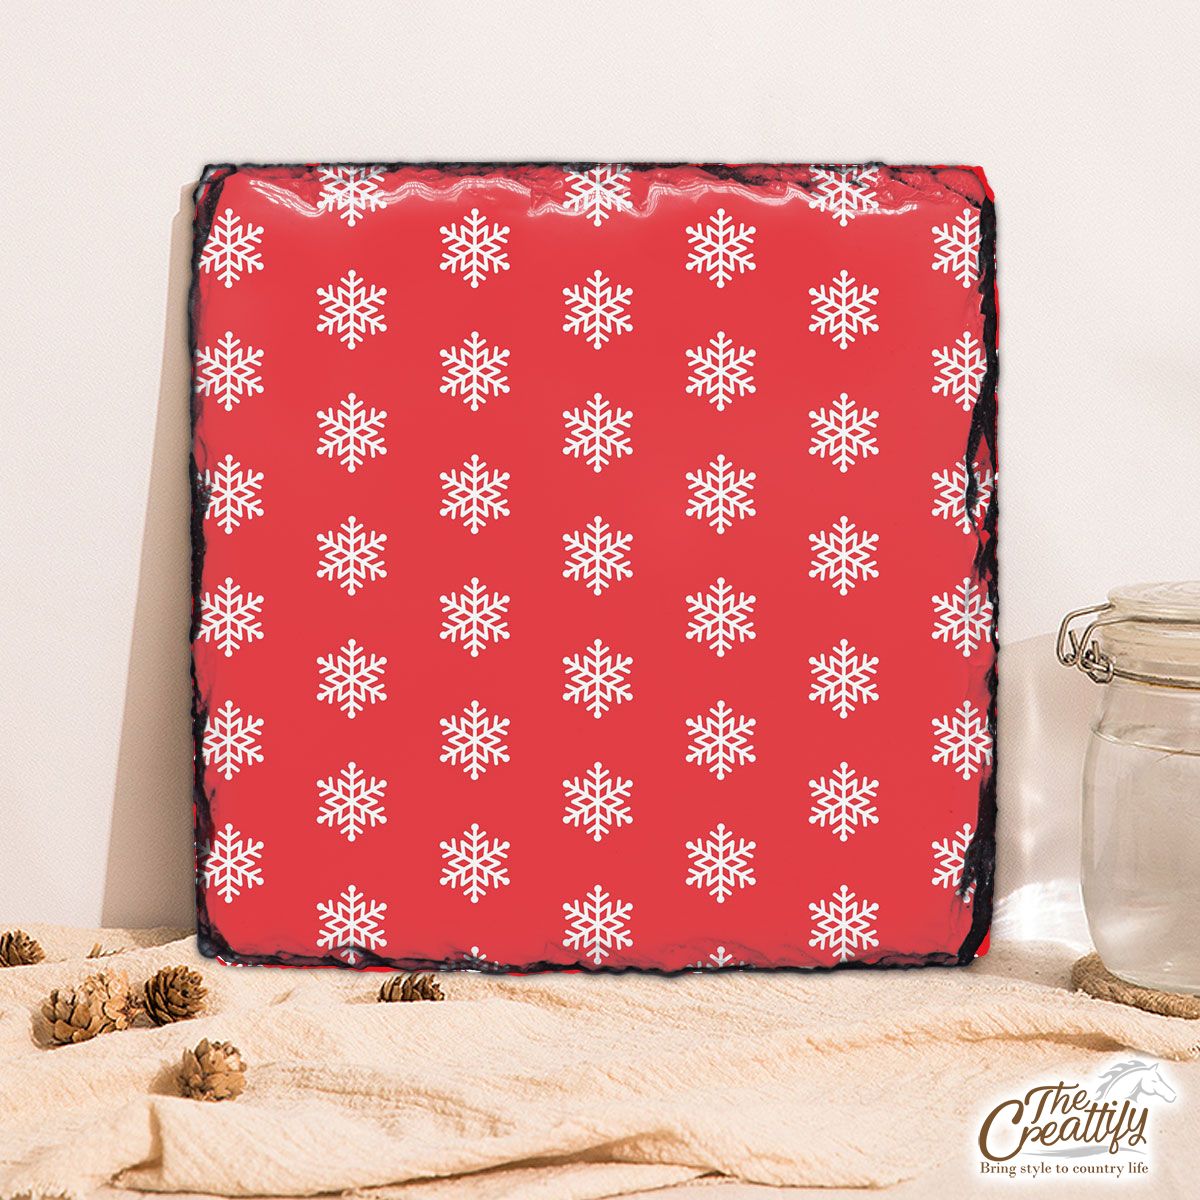 Snowflake Pattern, Christmas Snowflakes, Christmas Present Ideas With Red Square Lithograph